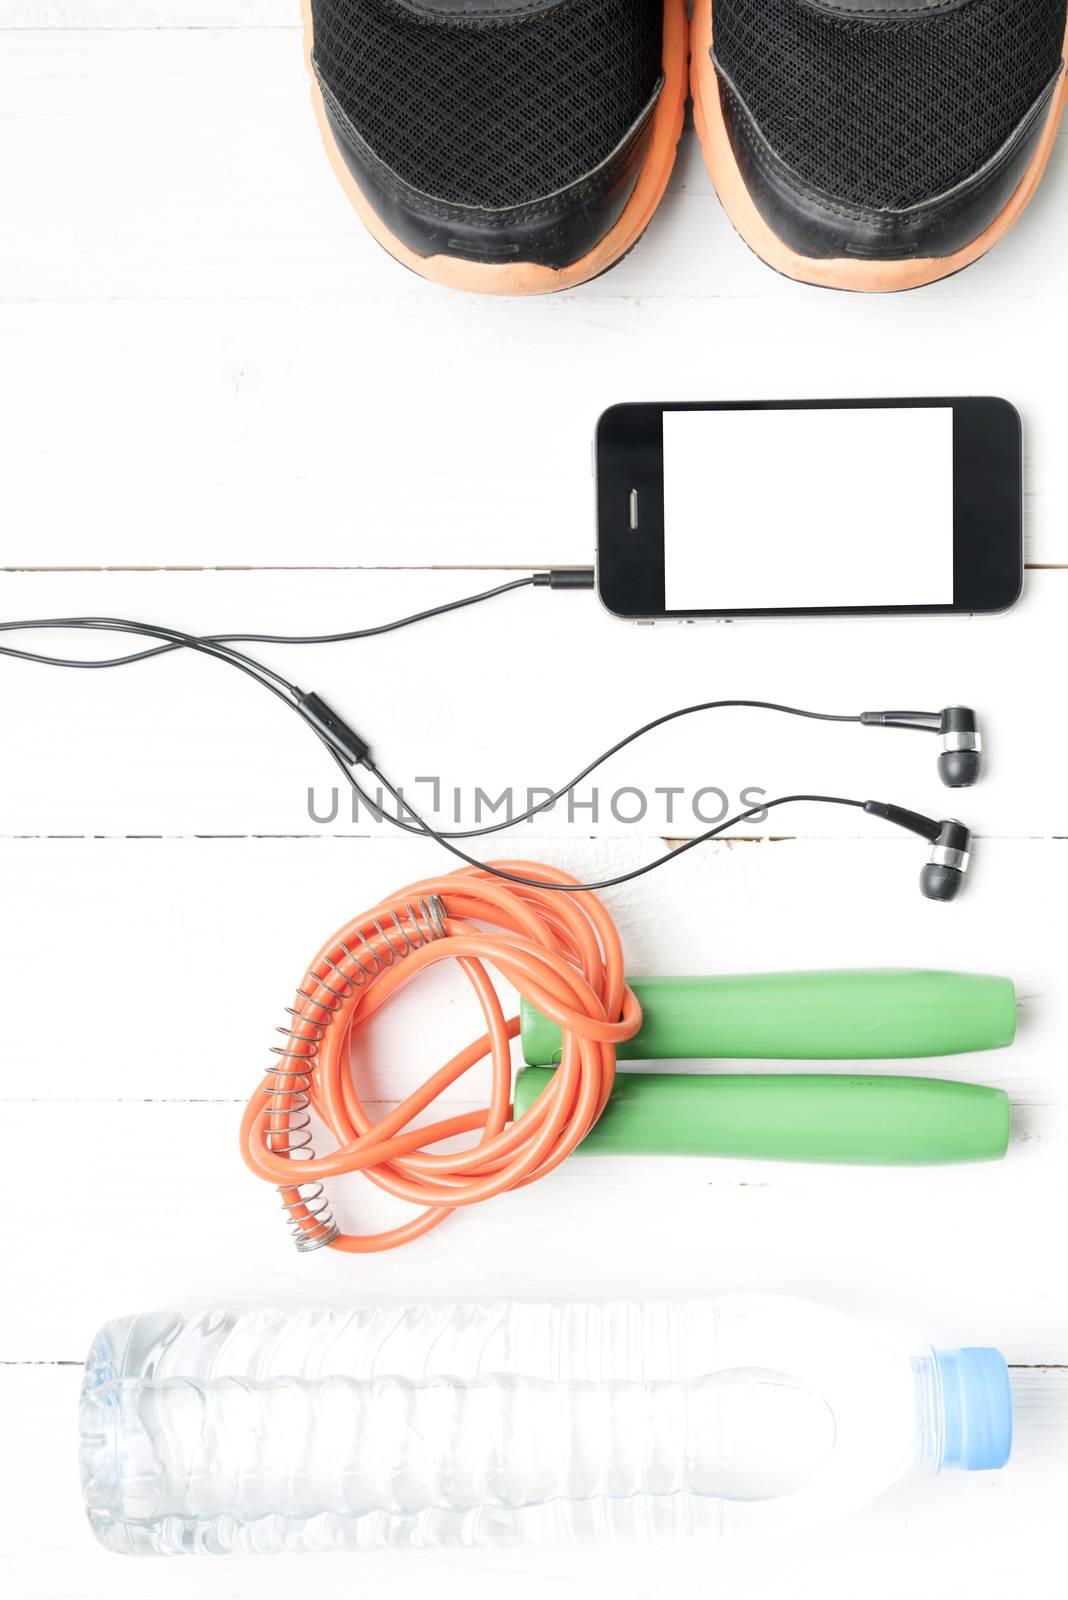 fitness equipment : running shoes,jumping rope,phone and water bottle on white wood table